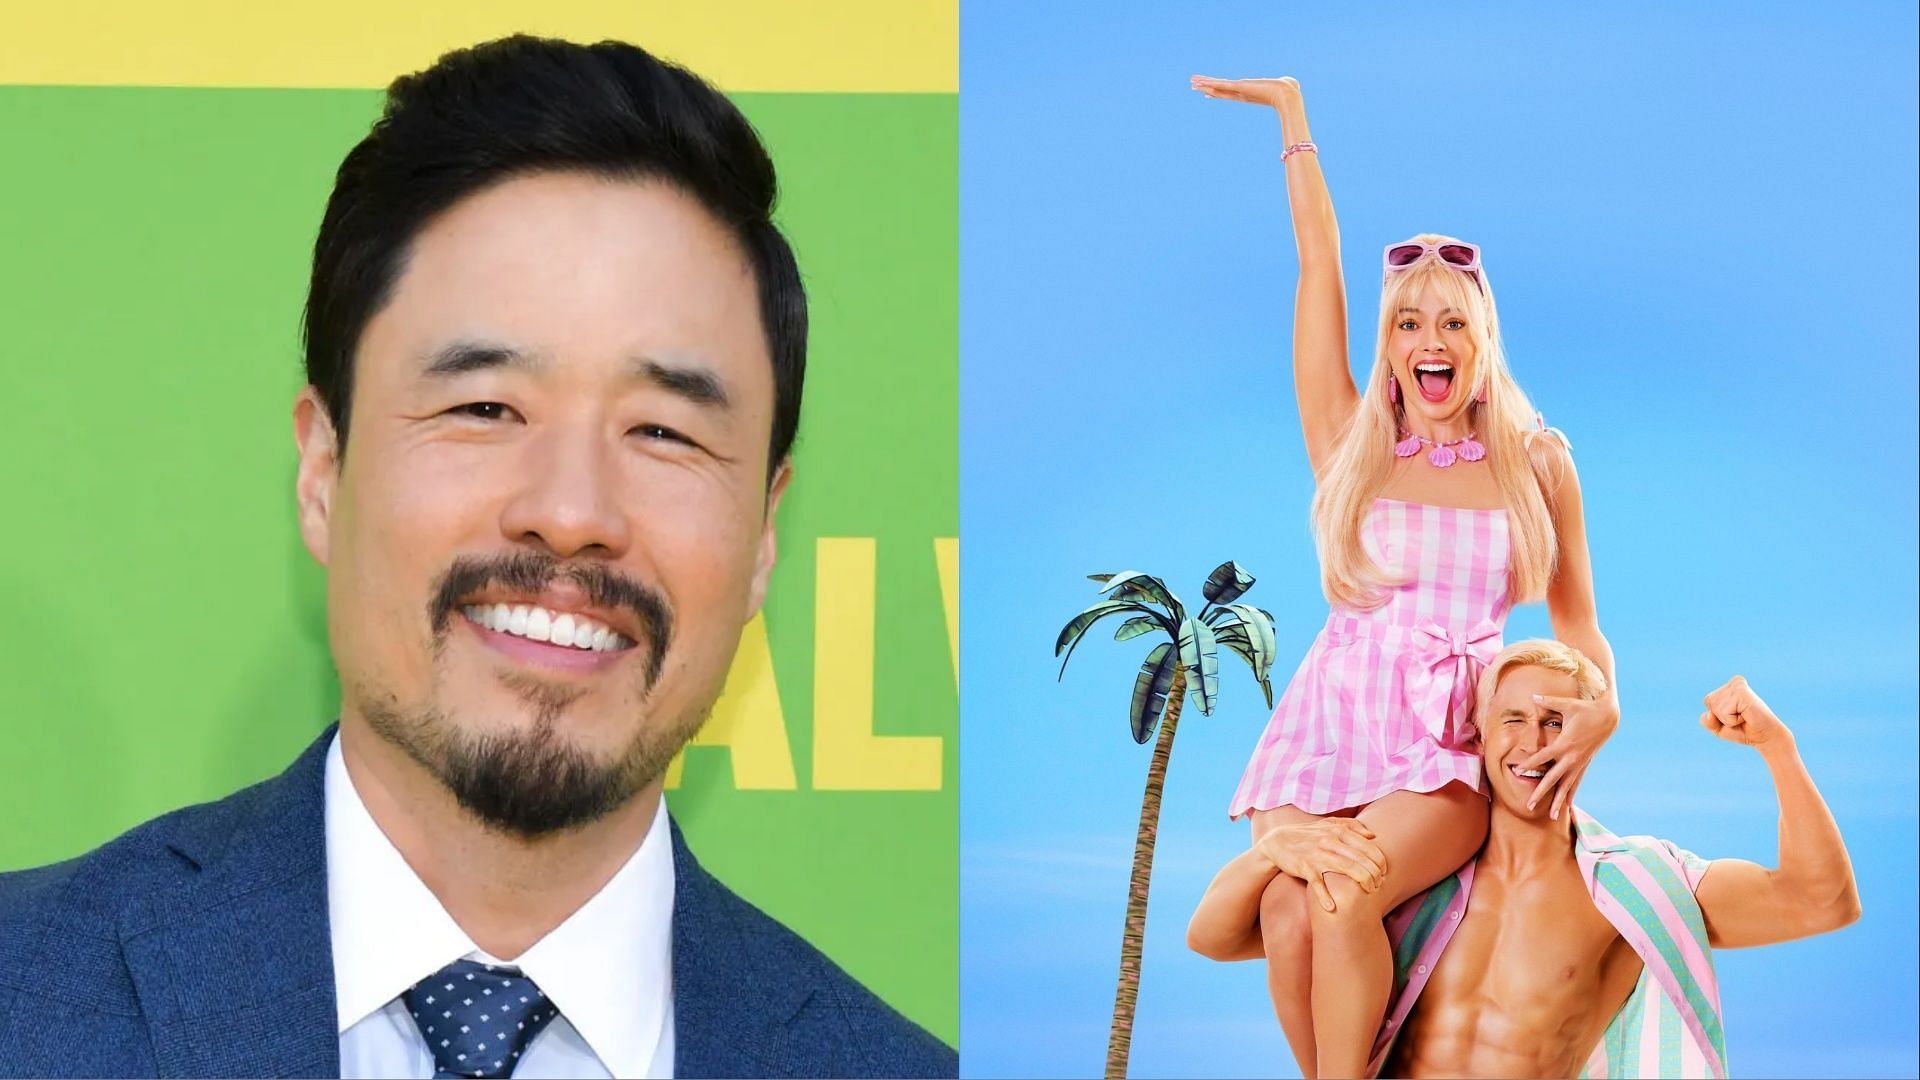 Randall Park and the Barbie poster. (Photo via Getty Images, @lawakboxd/Twitter)